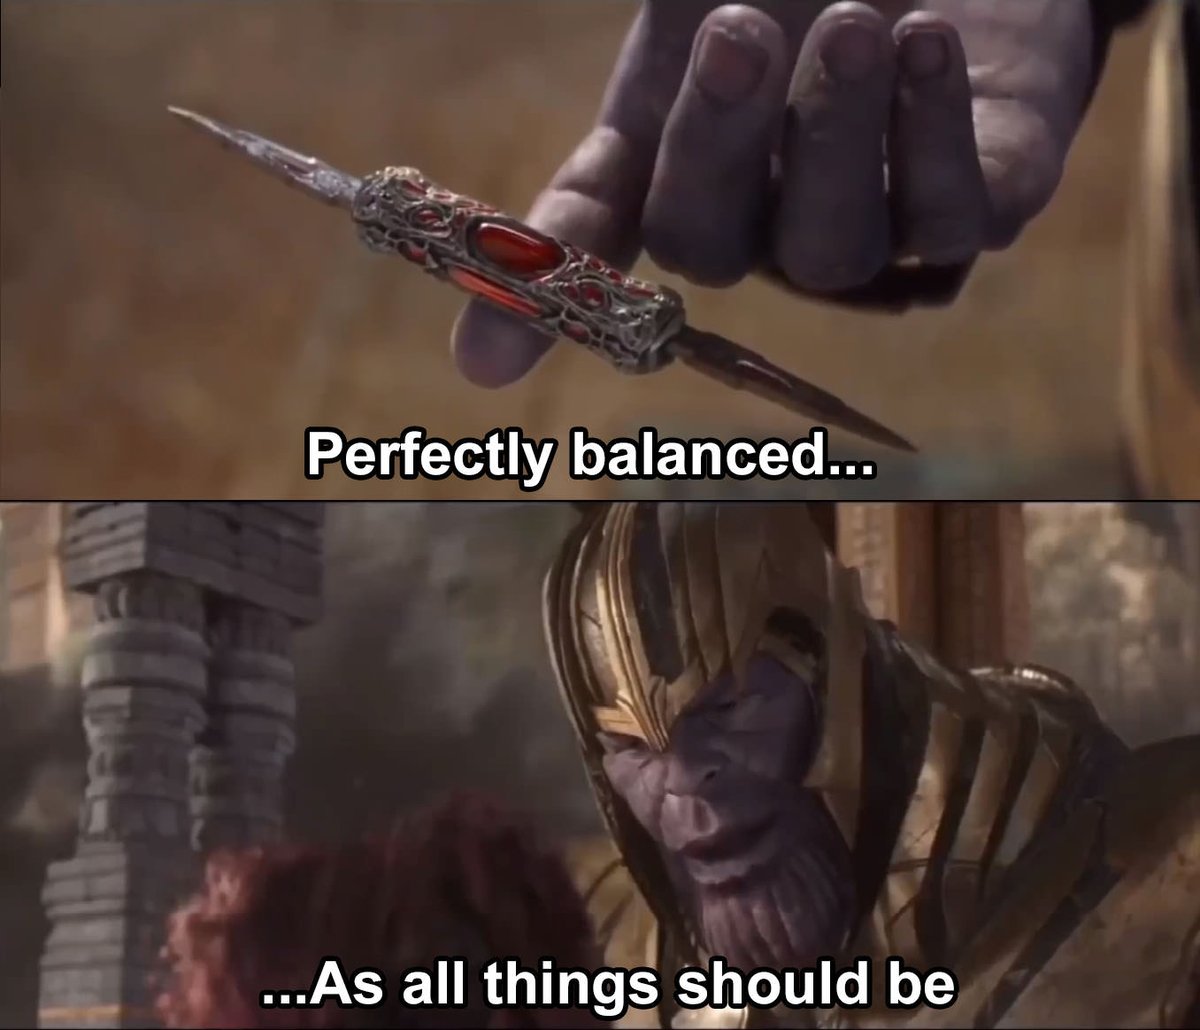 Perfectly balanced, as all things should be